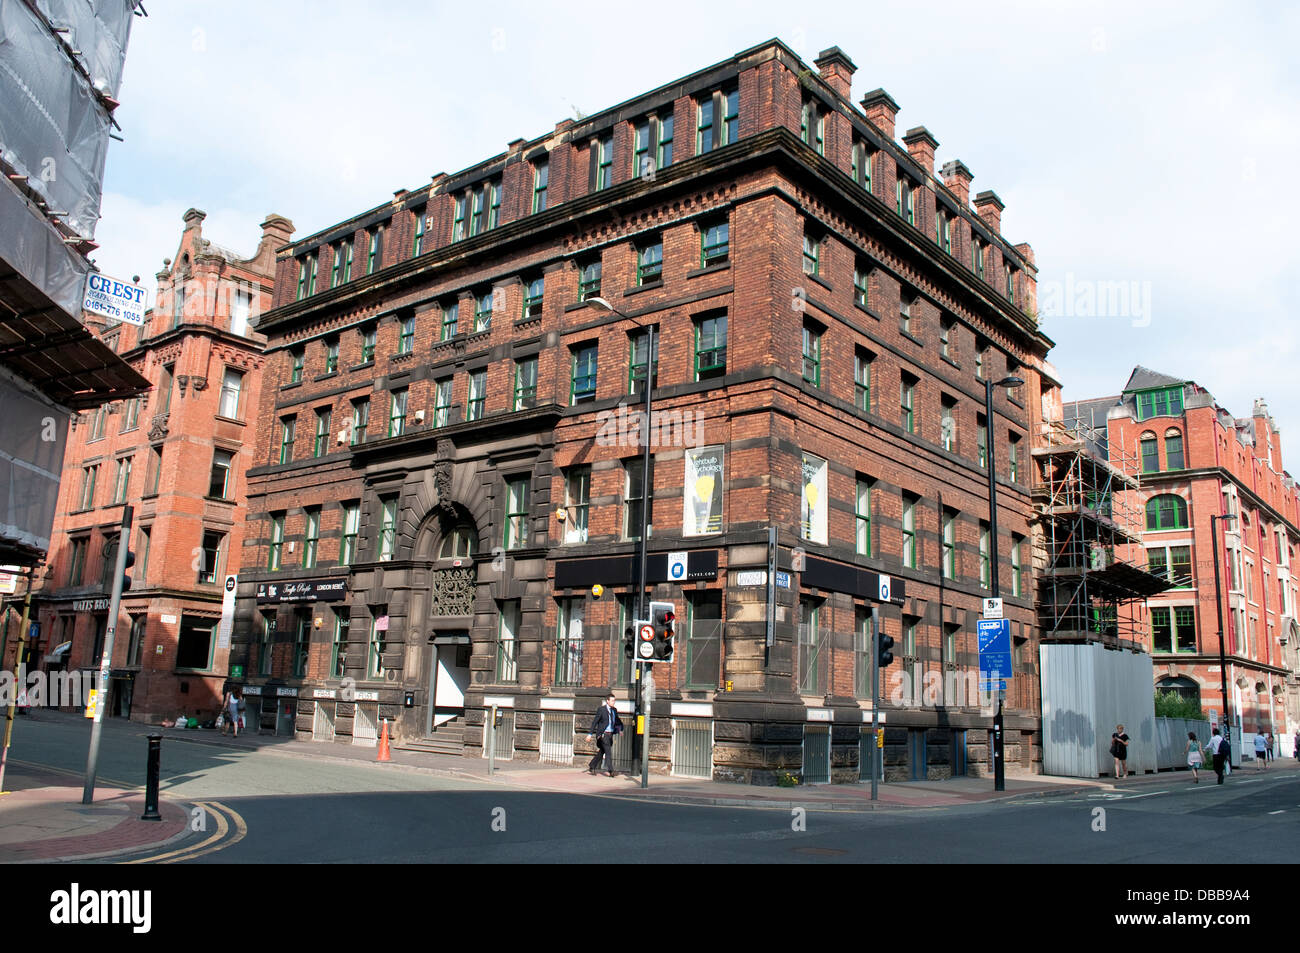 Brick house at the corner of Little Lever Street and Dale Street, Northern Quarter, Manchester, UK Stock Photo